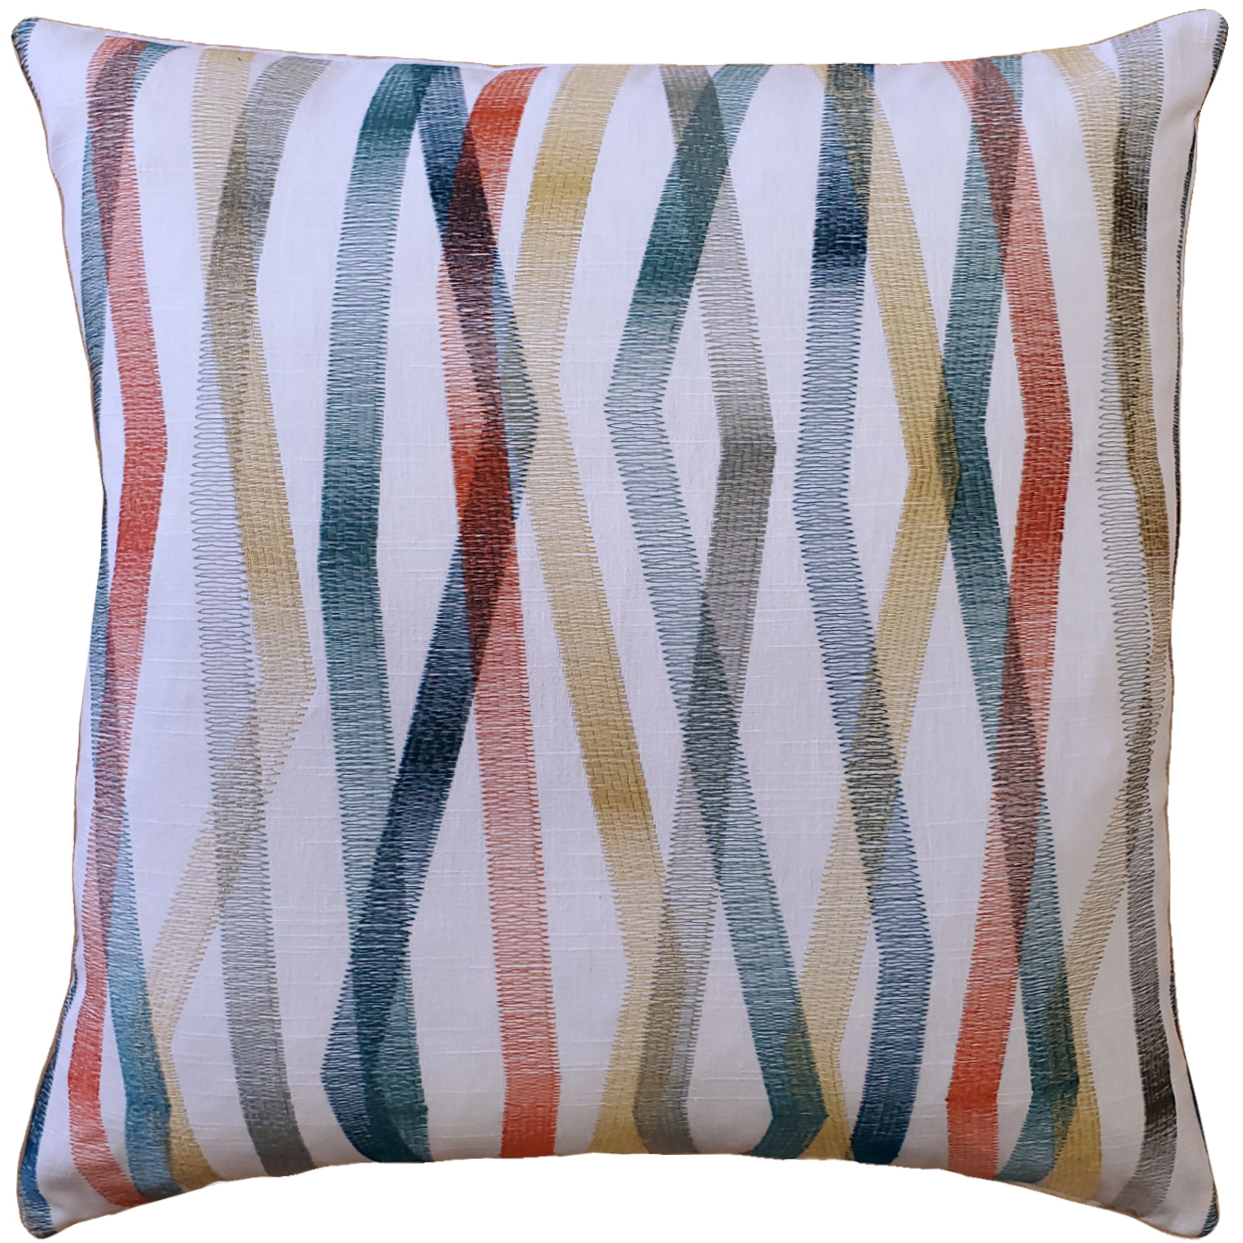 Wandering Lines Ocean Coast Throw Pillow 19x19 Inches Square, Complete Pillow With Polyfill Pillow Insert